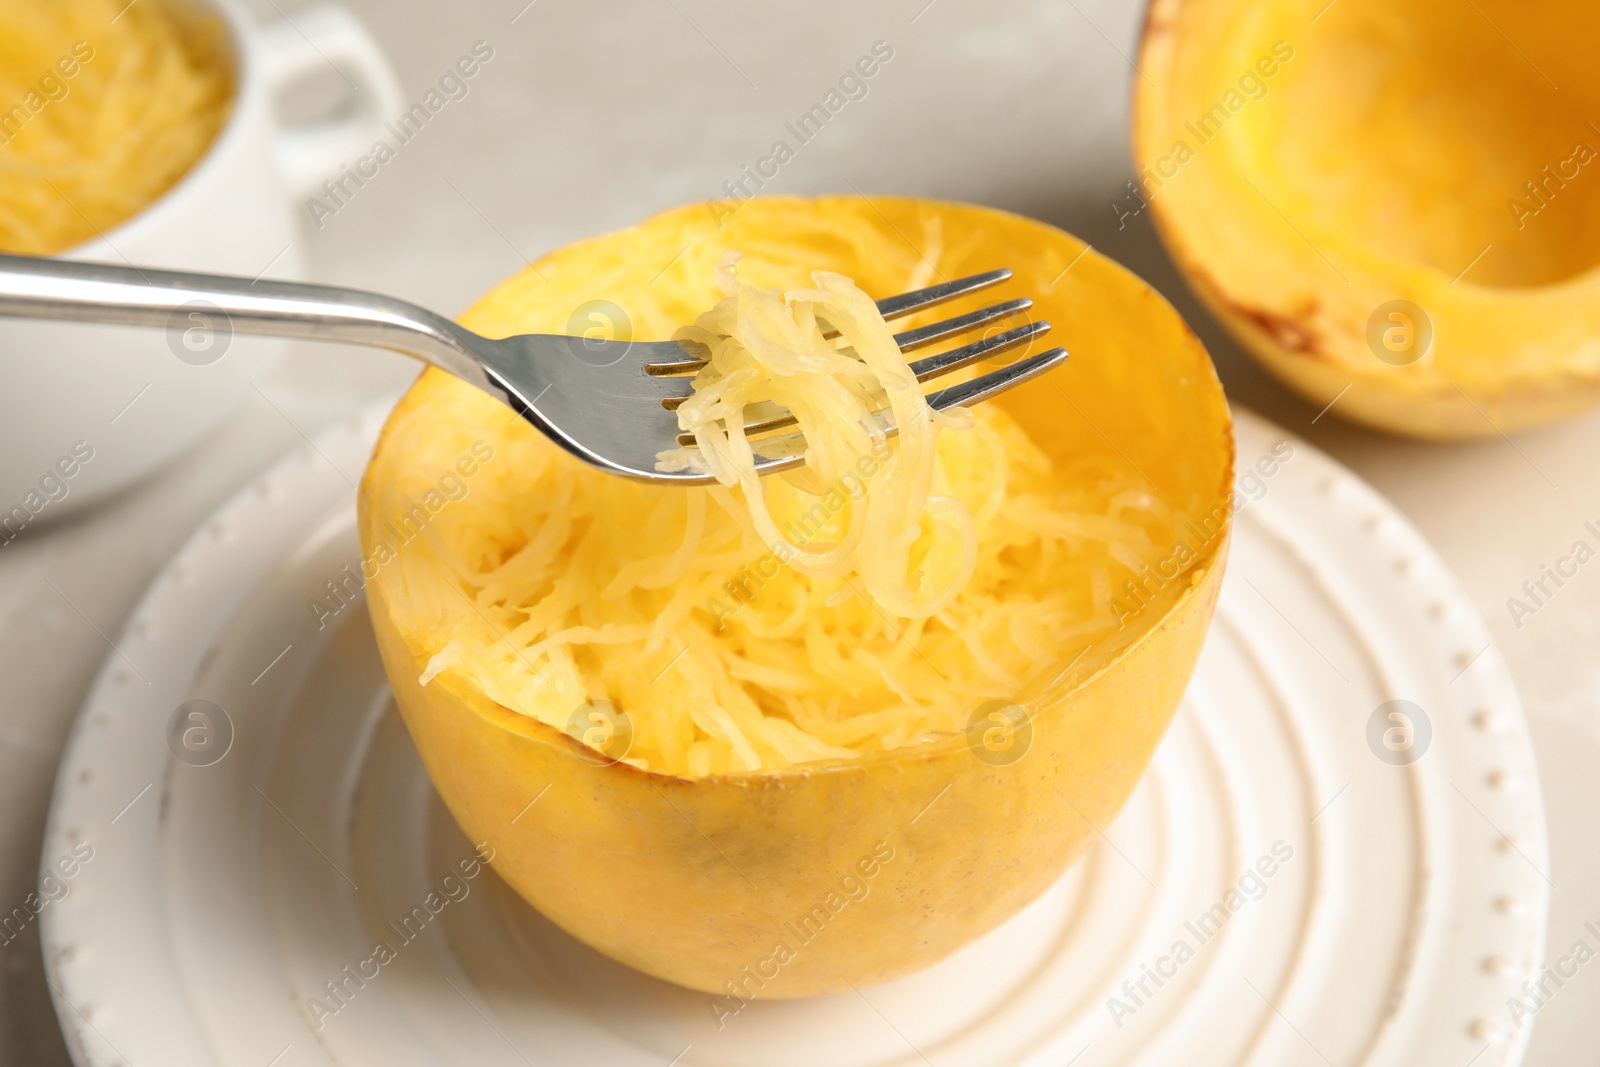 Photo of Fork with flesh over cooked spaghetti squash on plate